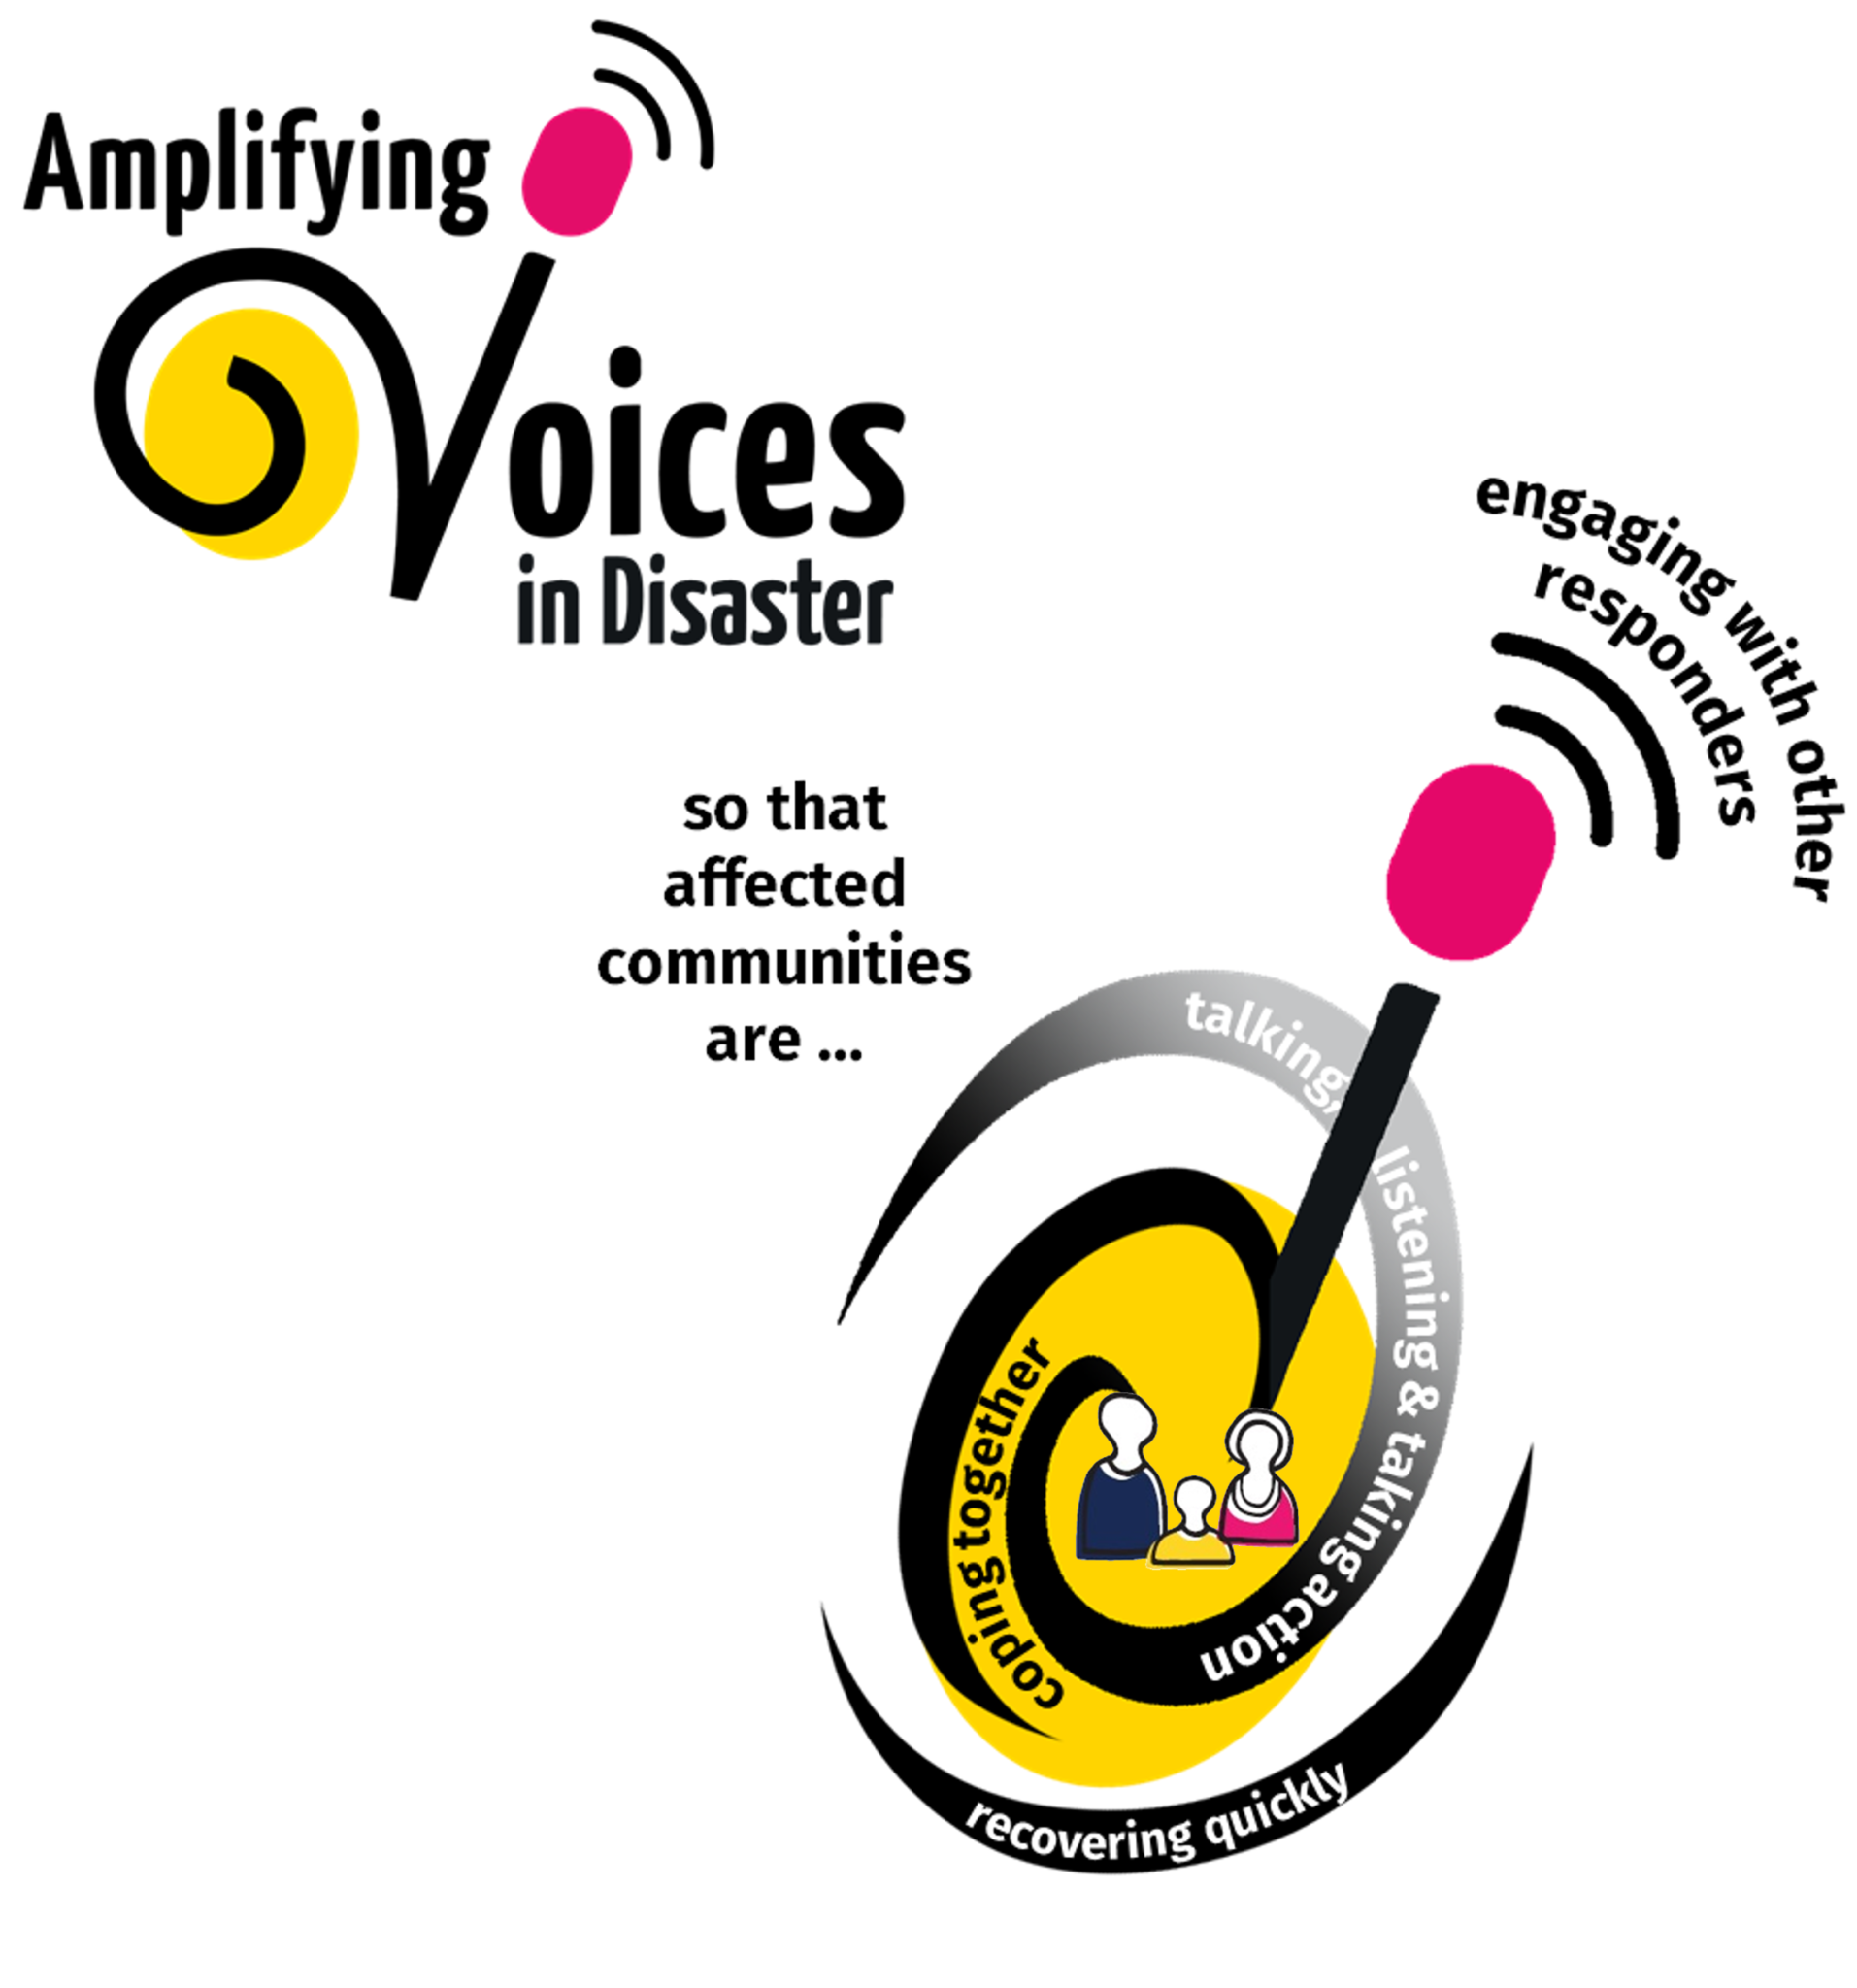 Amplifying Voices in Disaster logo and purpose